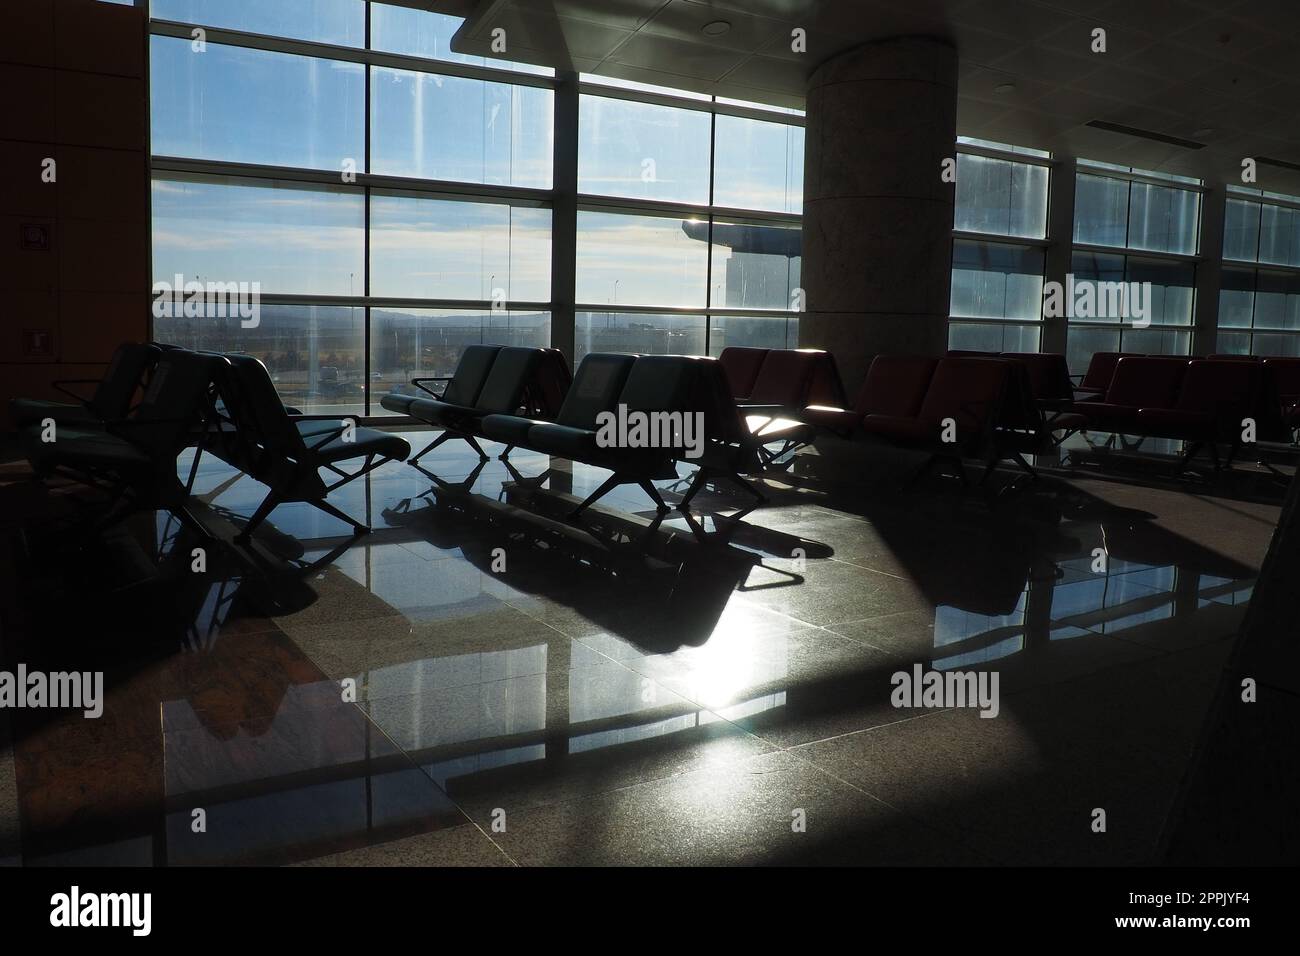 Ankara, Turkey, Esenboga Havalimani Airport. The waiting room, a place at the airport equipped for the stay of passengers who have passed check-in and screening and are waiting to board their flight. Stock Photo